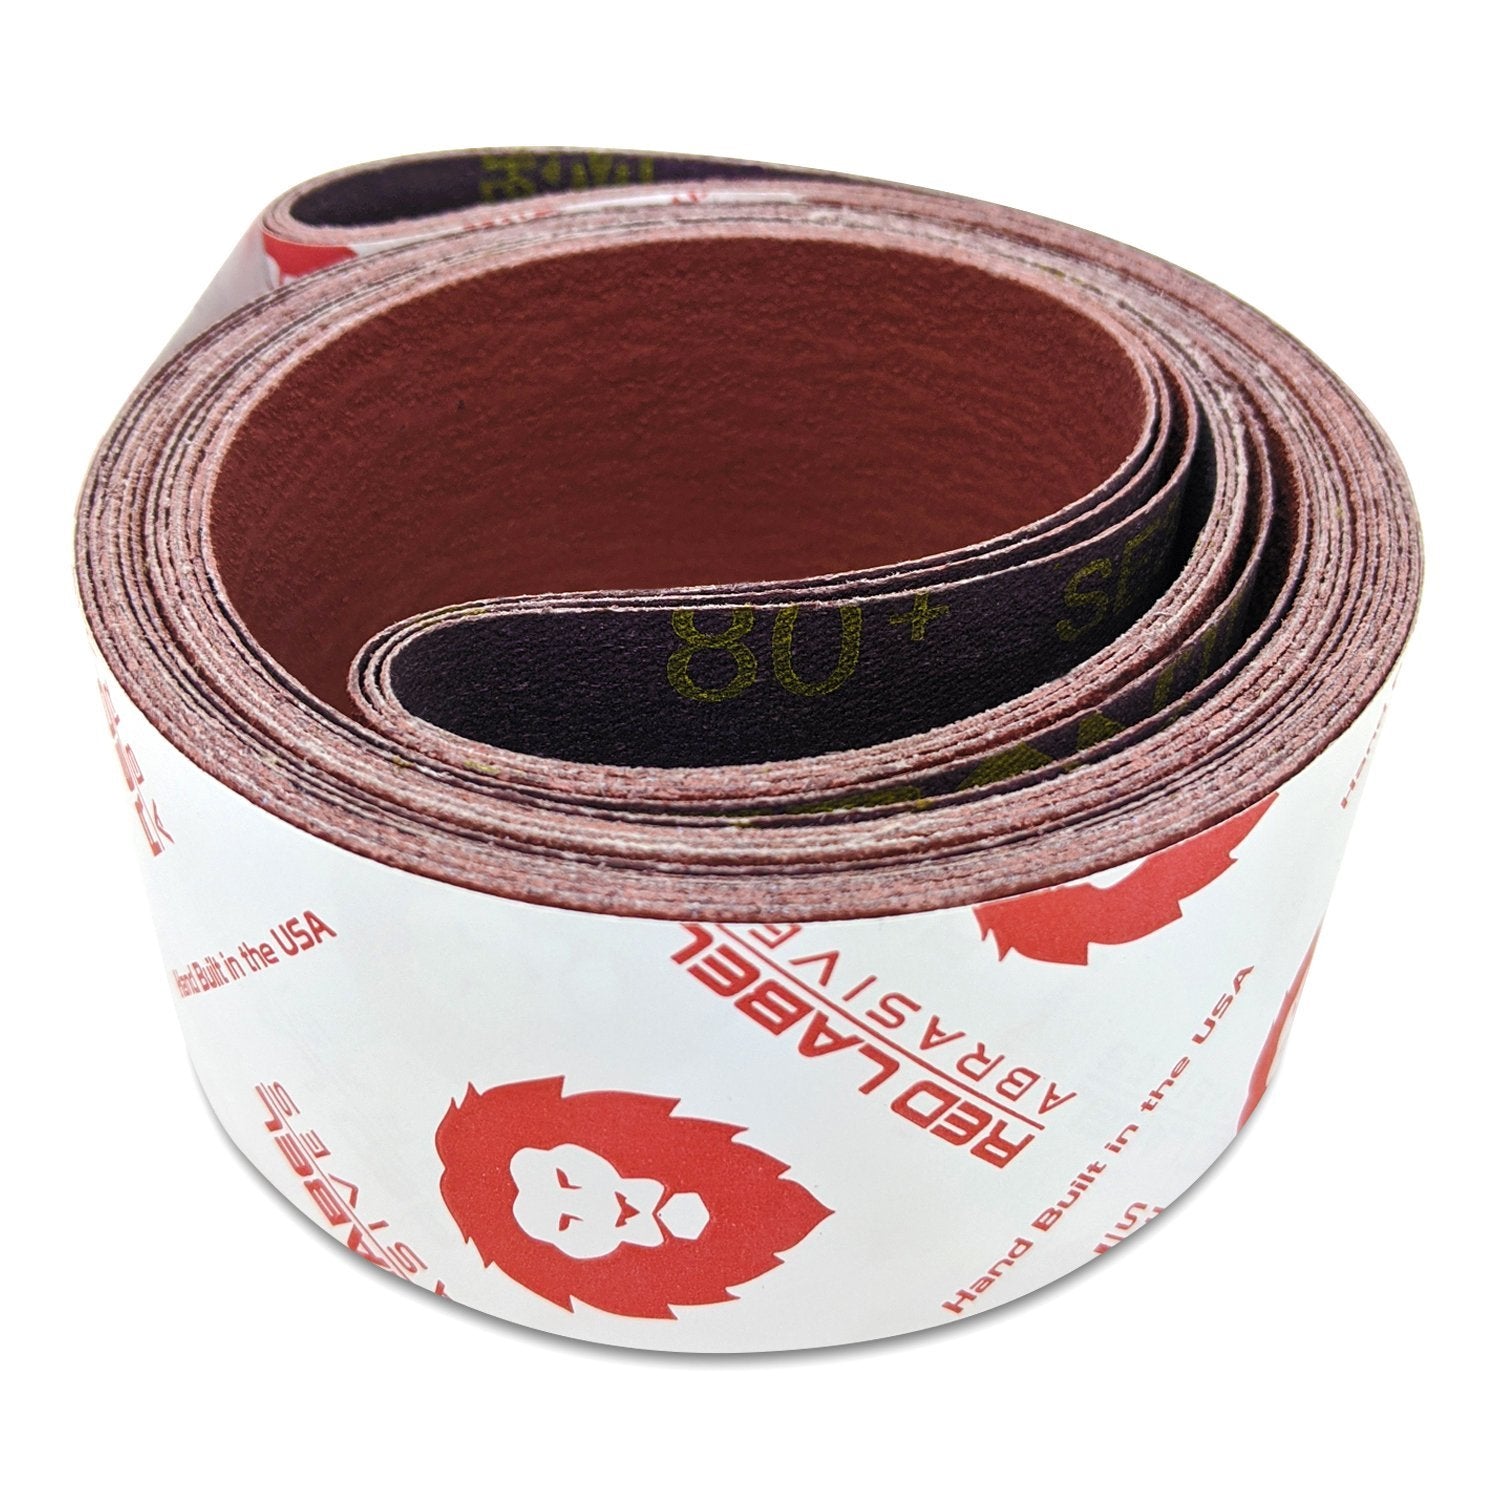 2 X 72 Inch Non-Woven Surface Conditioning Sanding Belts - Red Label  Abrasives